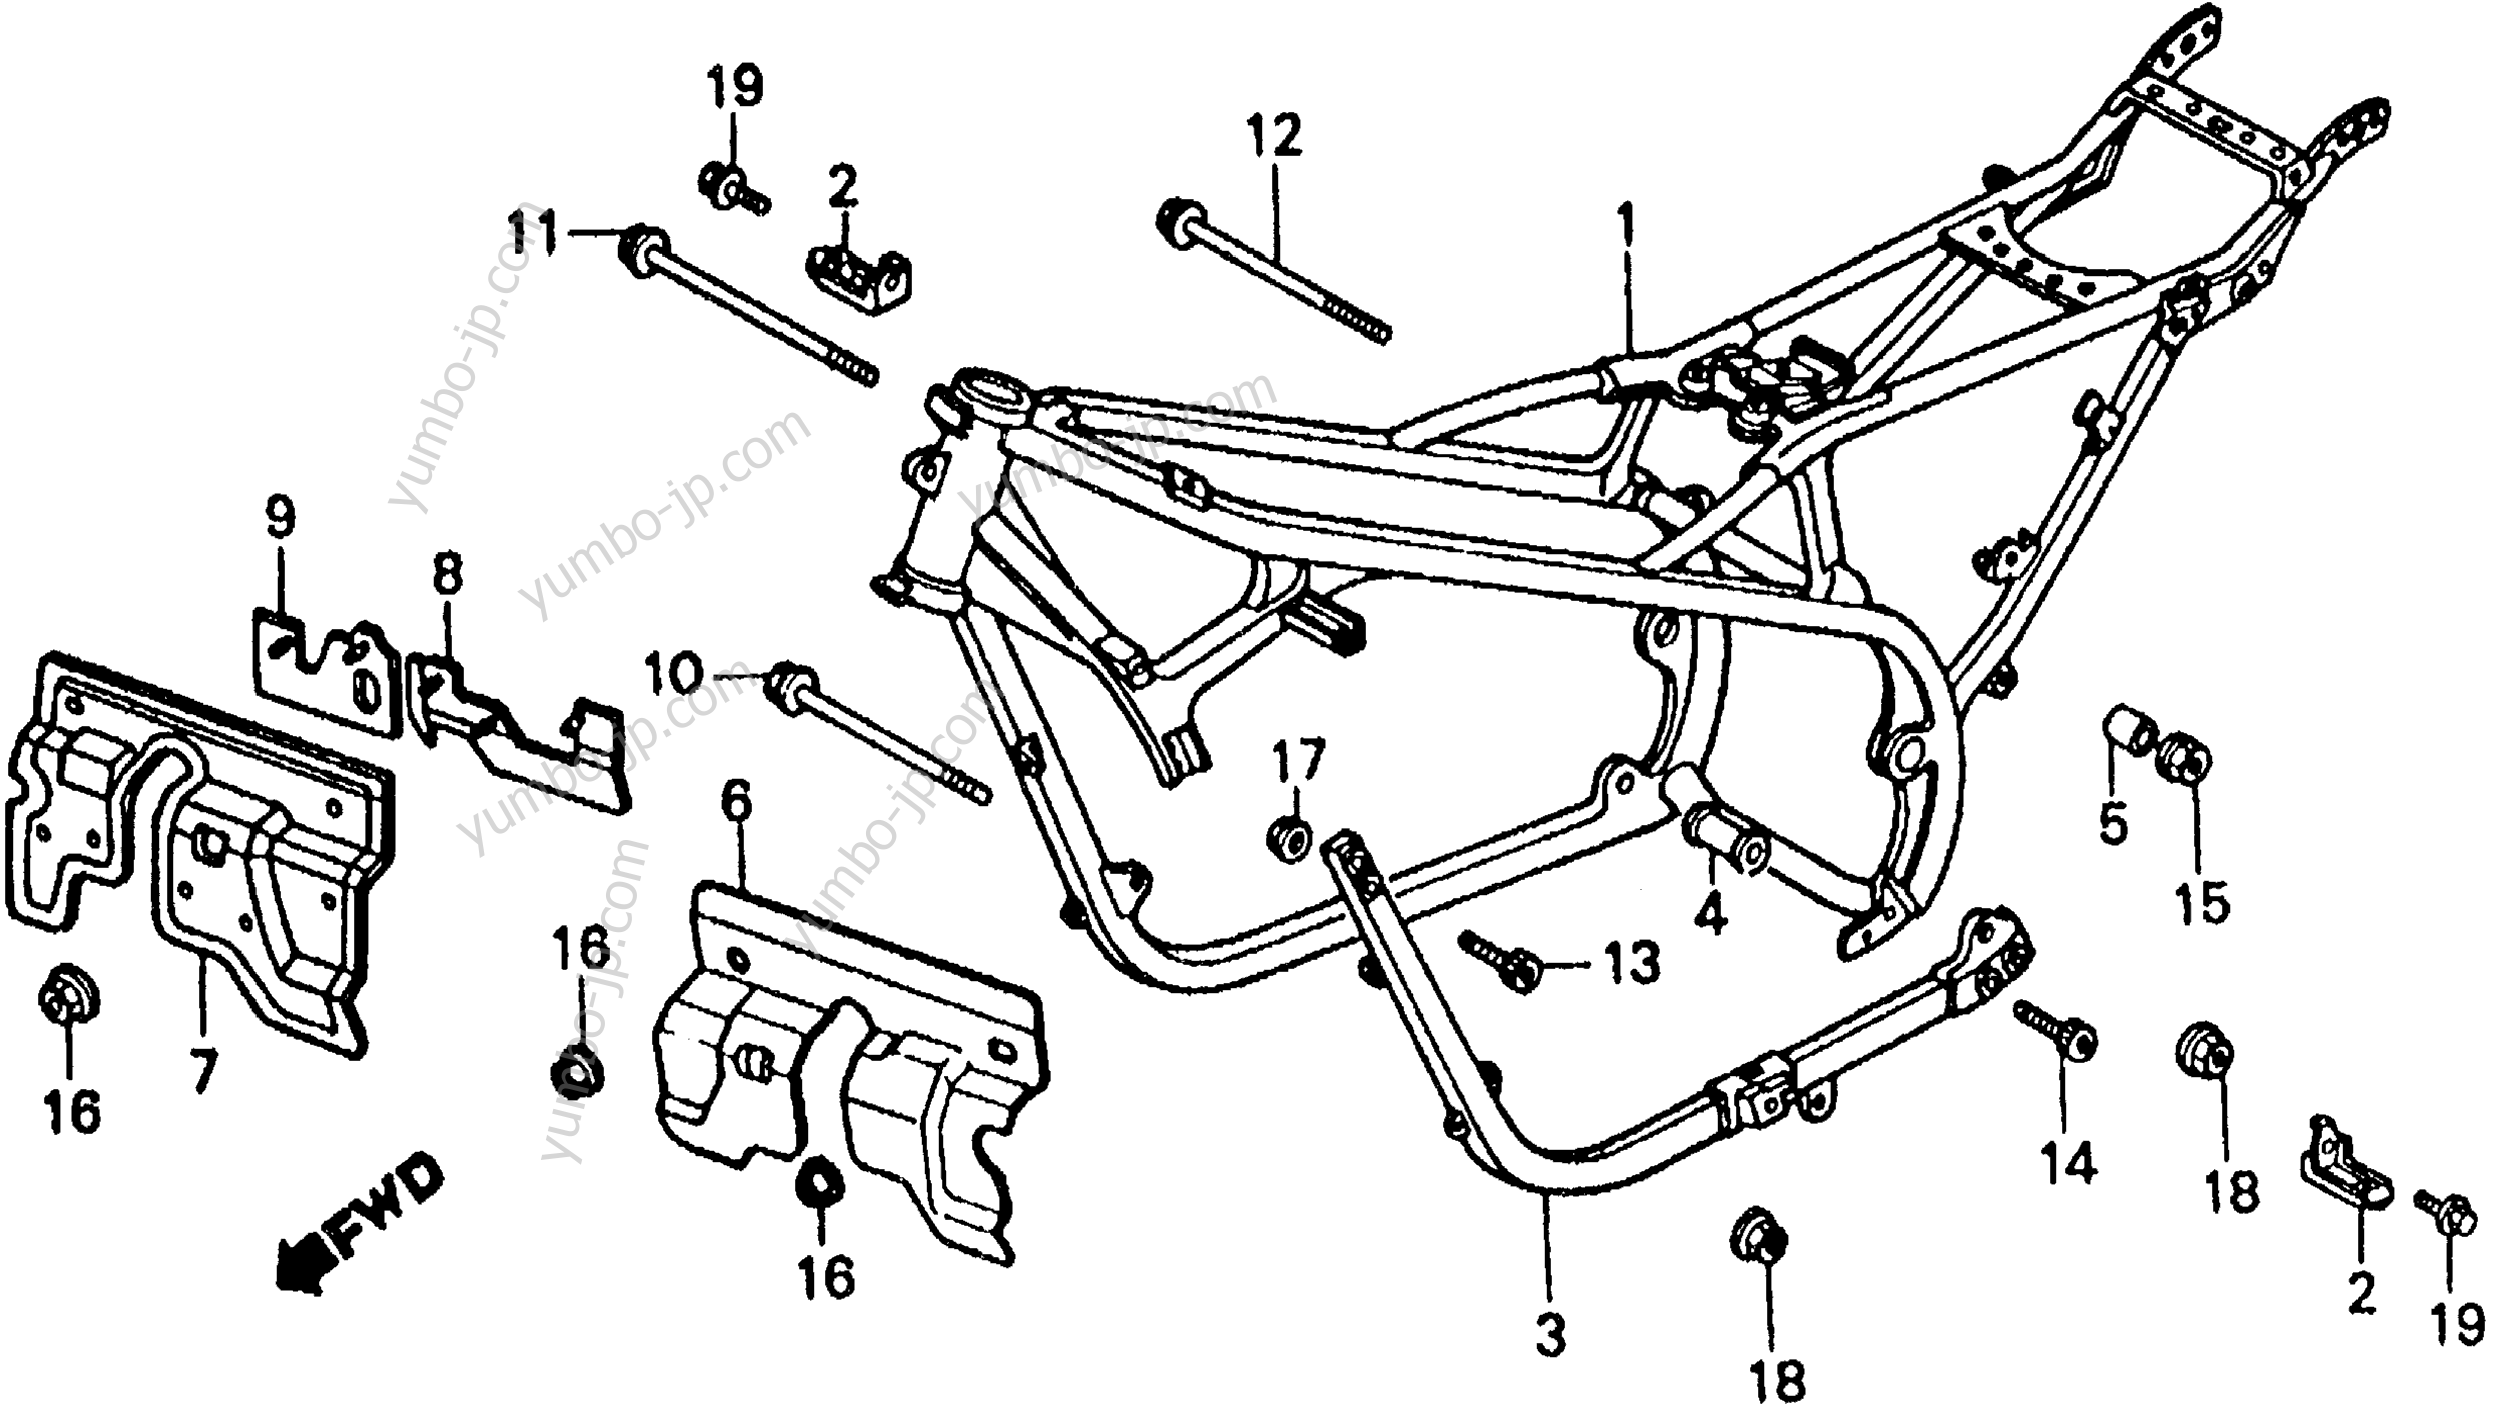 FRAME for motorcycles HONDA VF500F AC 1984 year